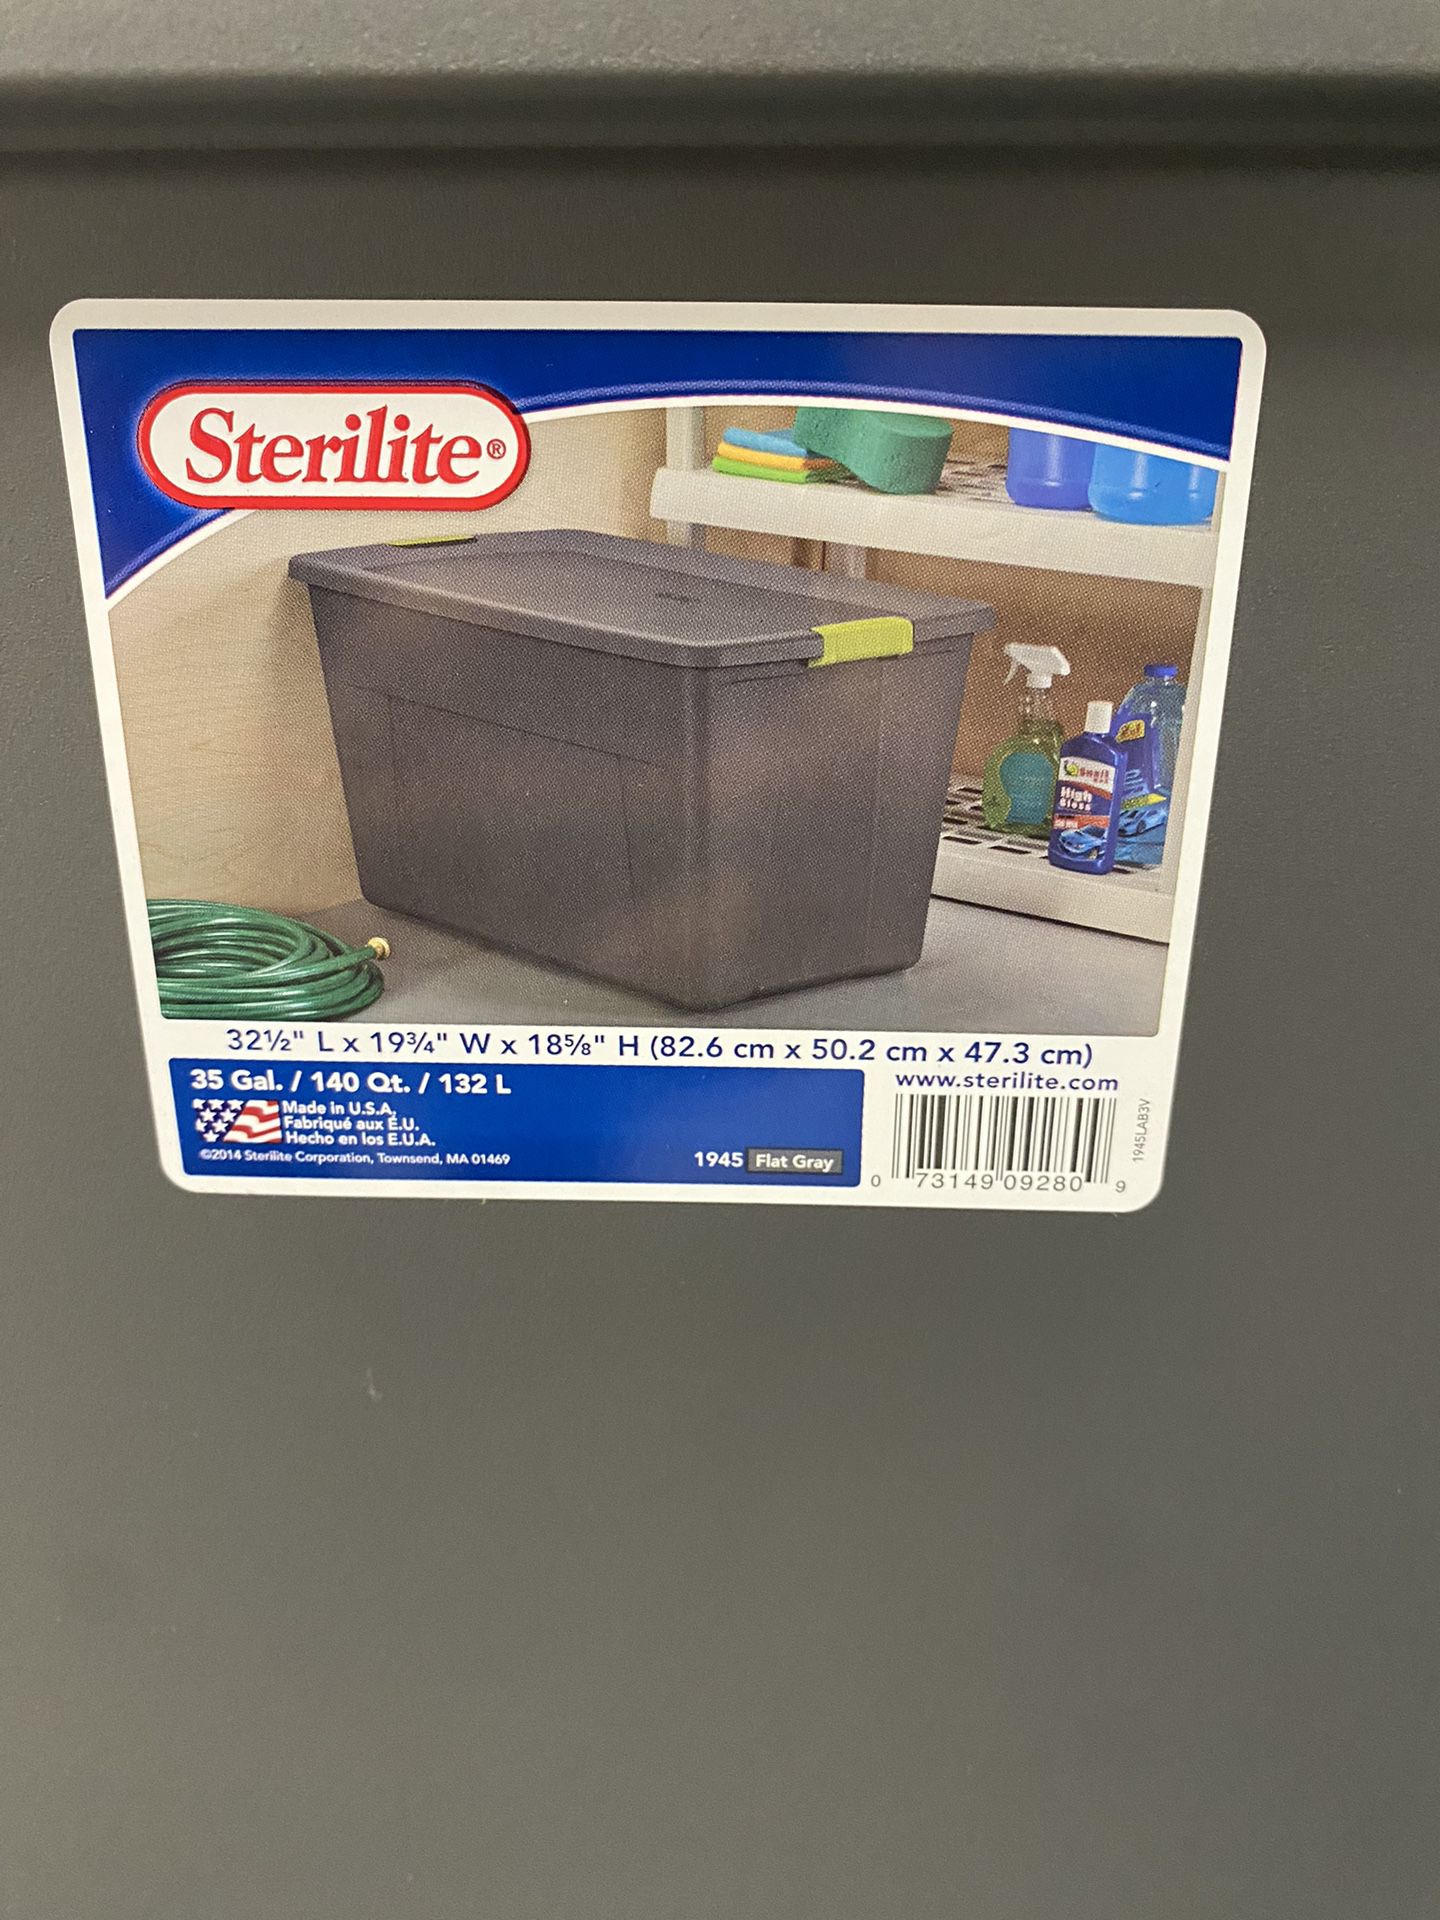 Sterilite 35 Gallon Latch Tote, Stackable Storage Bin with Latching Lid, Plastic Container to Organize Basement, Gray Base and Lid, 